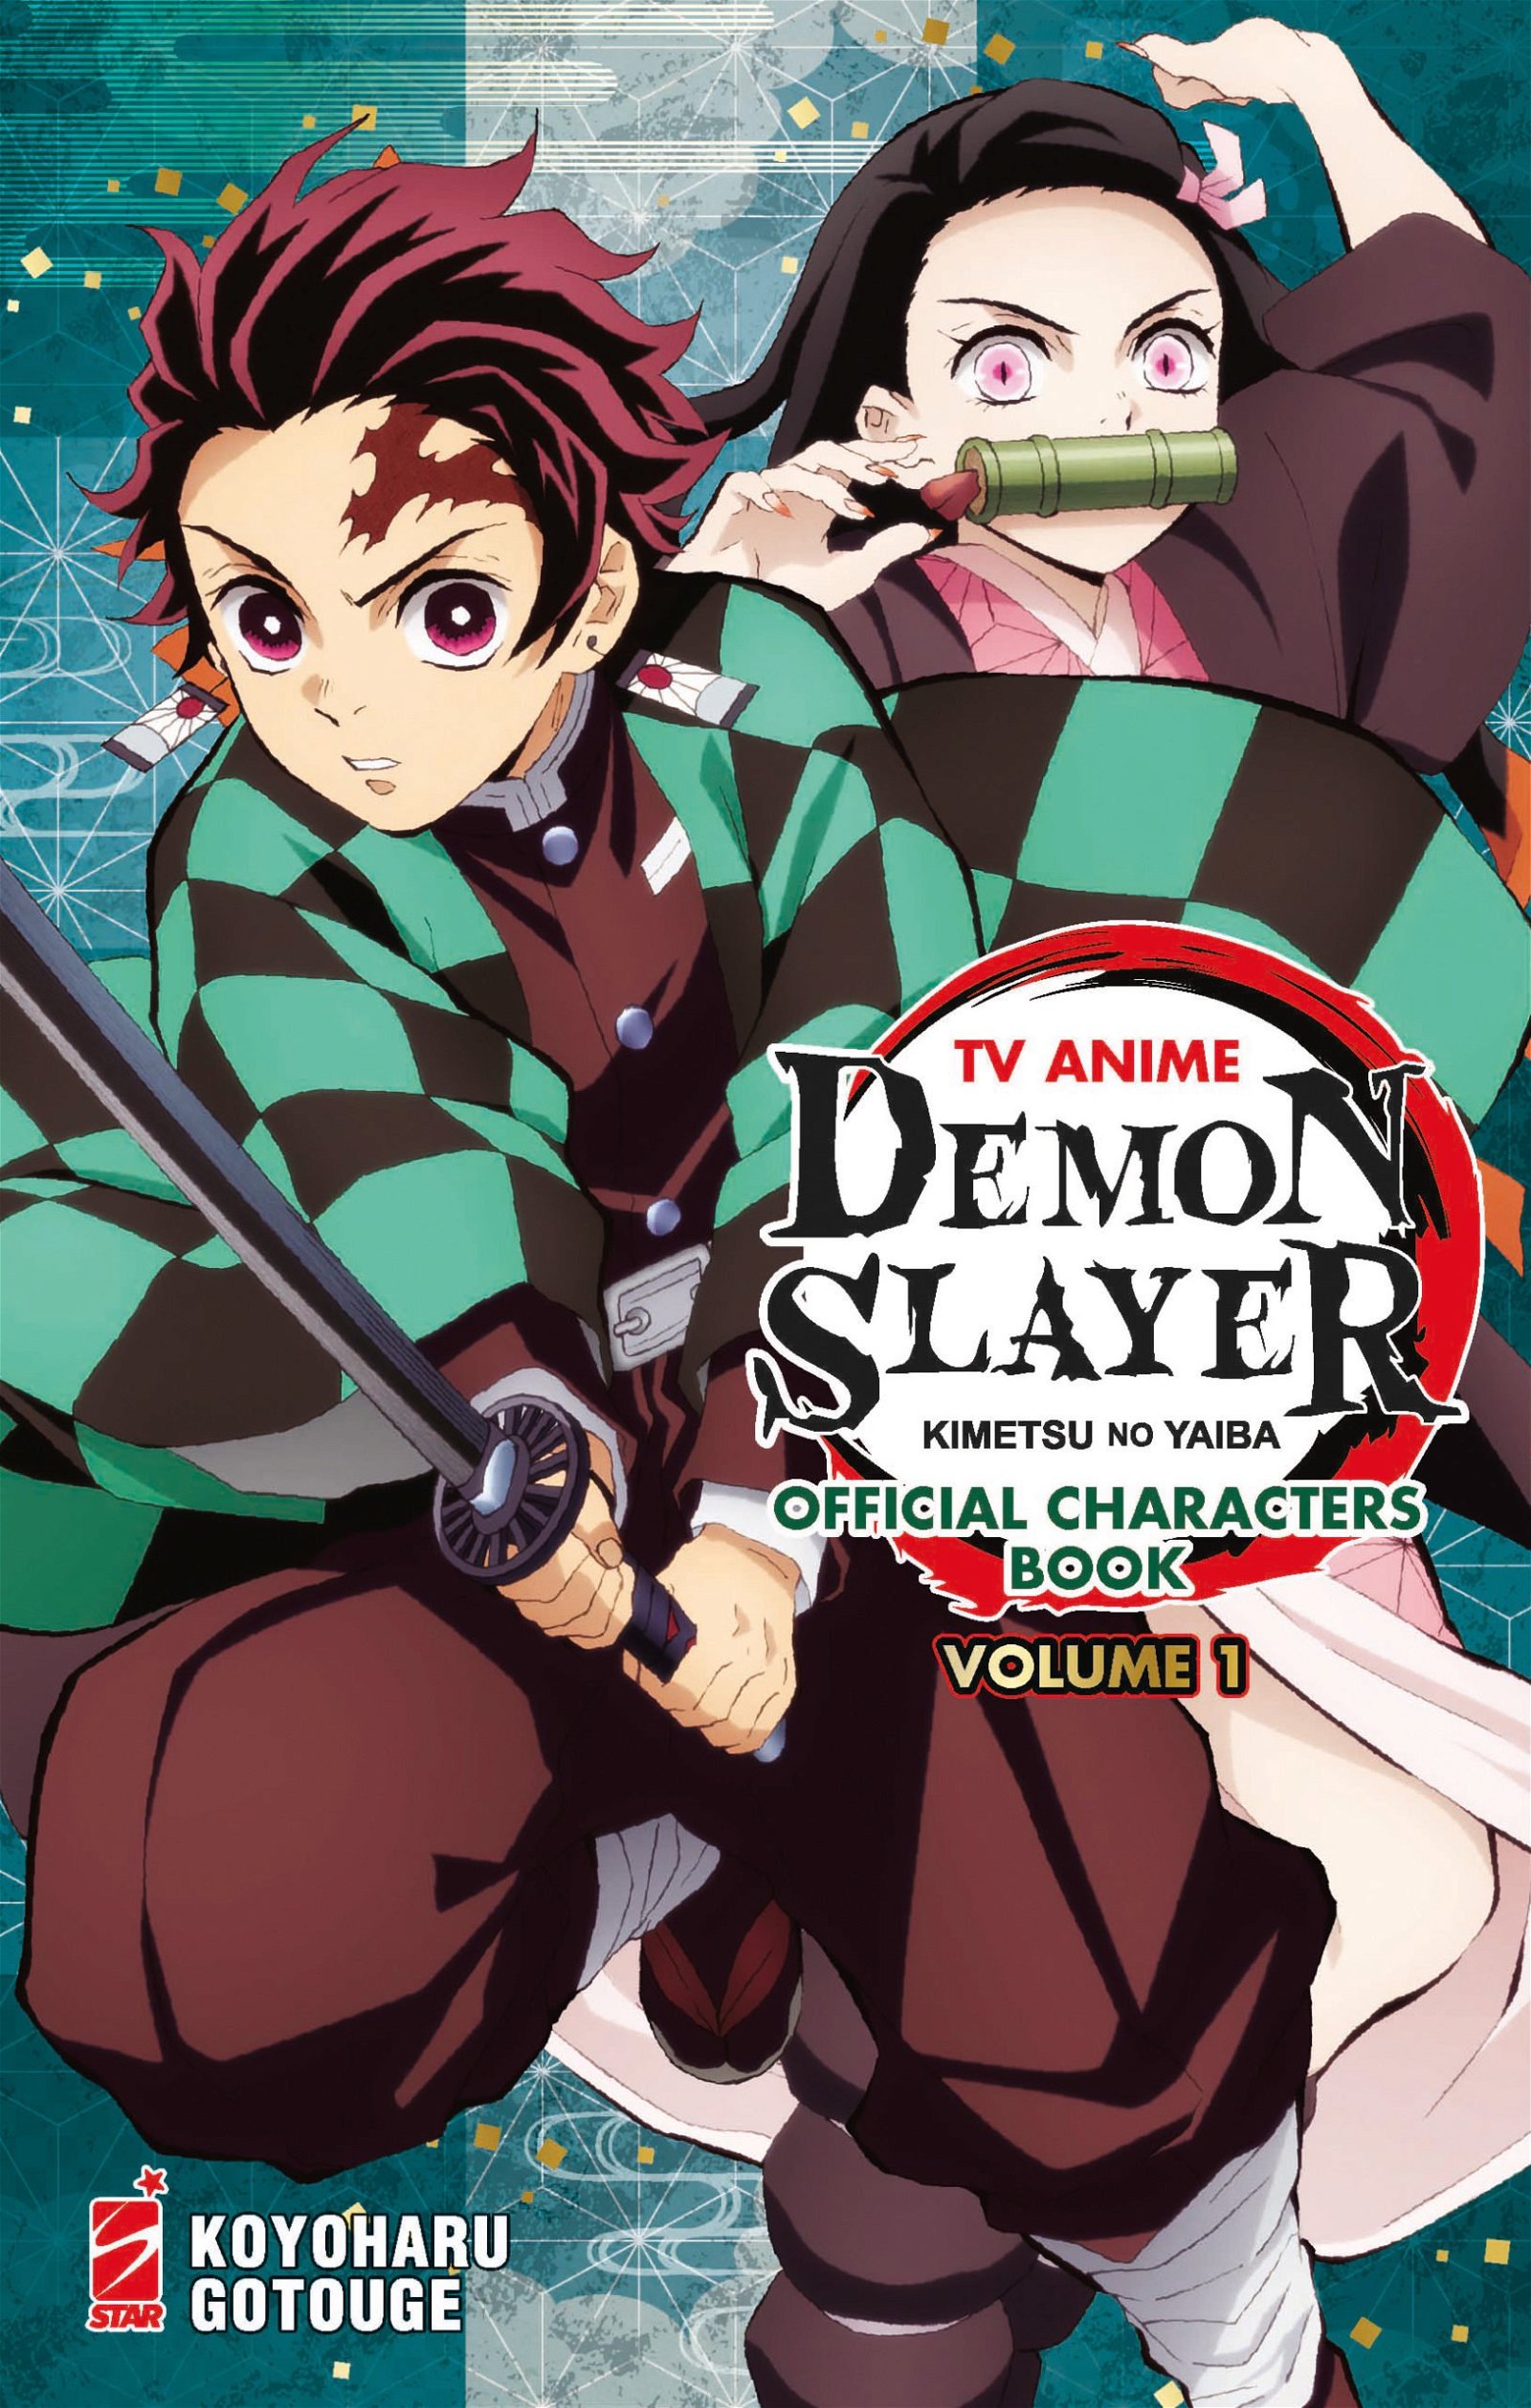 DEMON SLAYER TV ANIME OFFICIAL CHARACTERS BOOK 1 DI 3